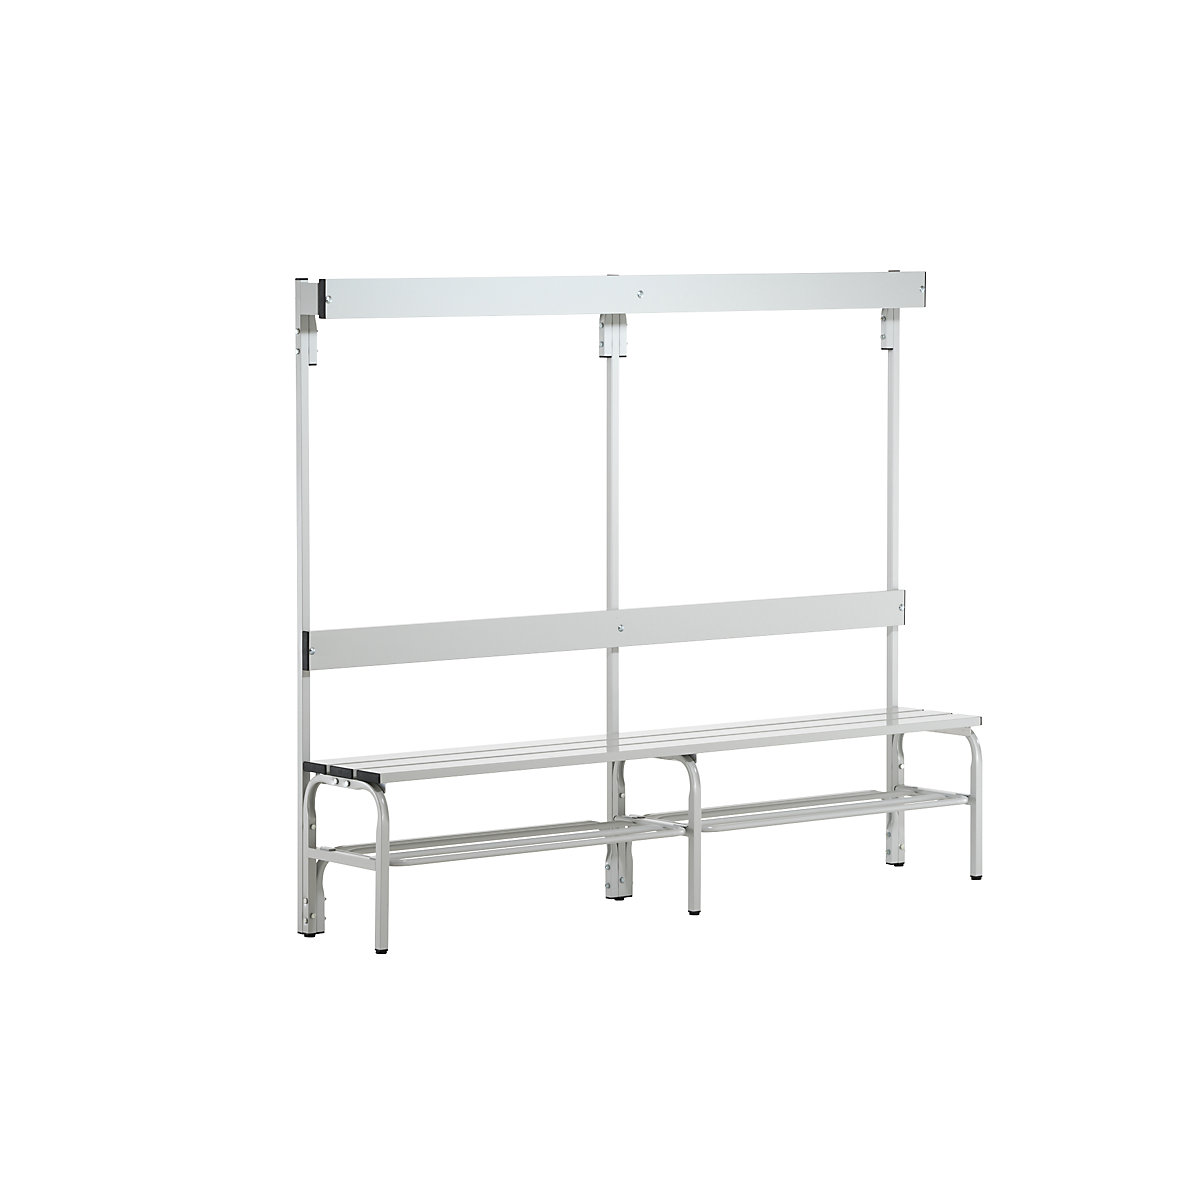 Sypro – Changing room bench made of stainless steel, HxD 1650 x 375 mm, length 1500 mm, 6 hooks, light grey, shoe rack